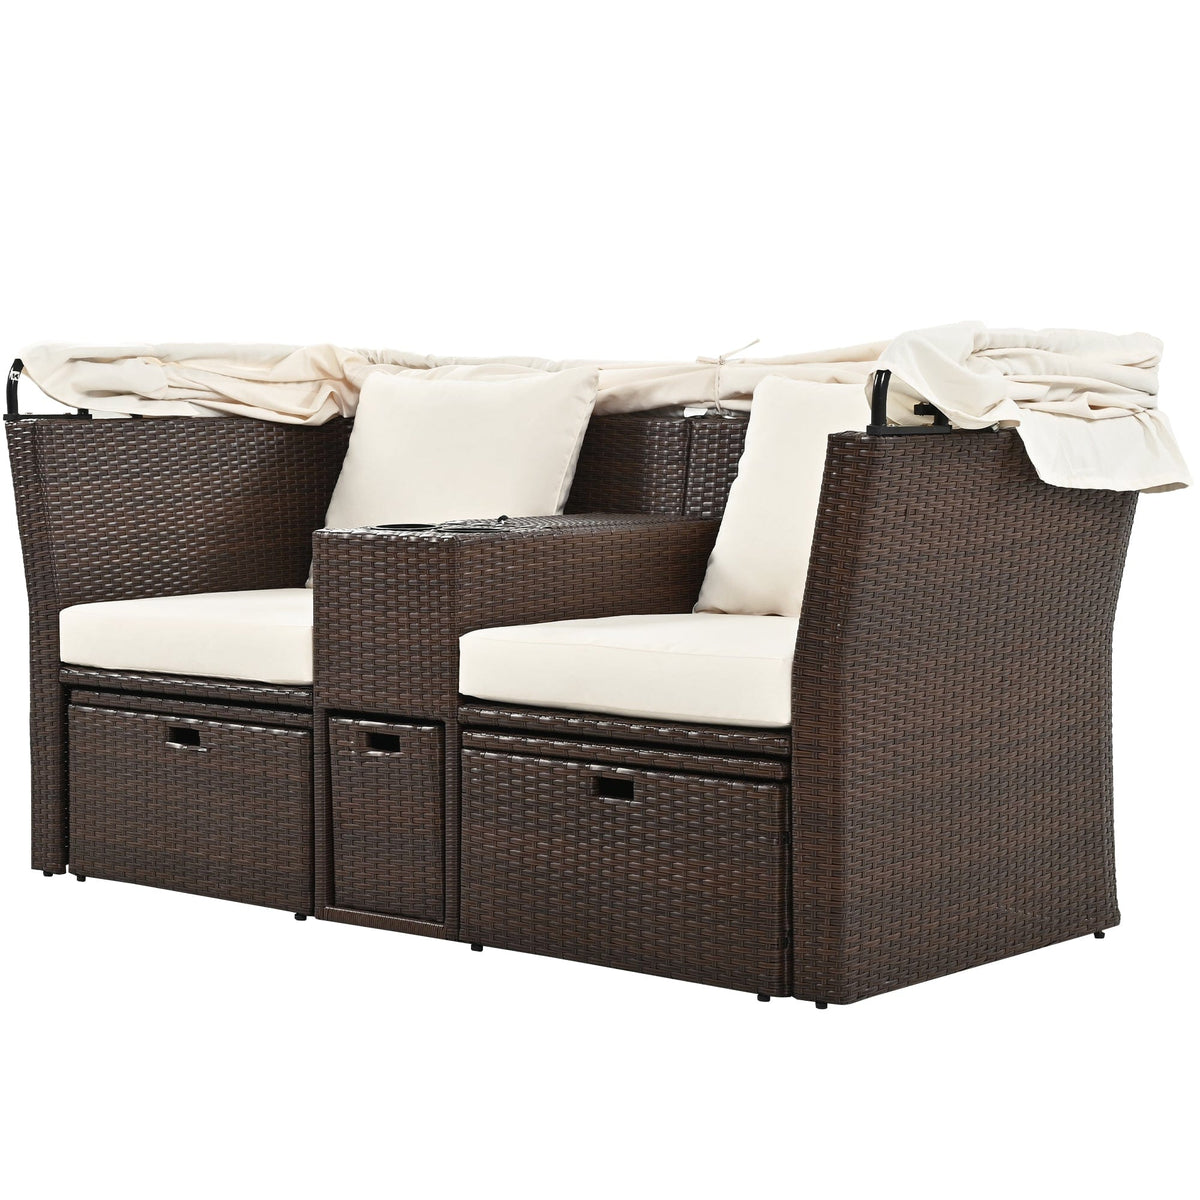 Acme 2-Seater Outdoor Patio Daybed - White Mattress-Xperts-Florida